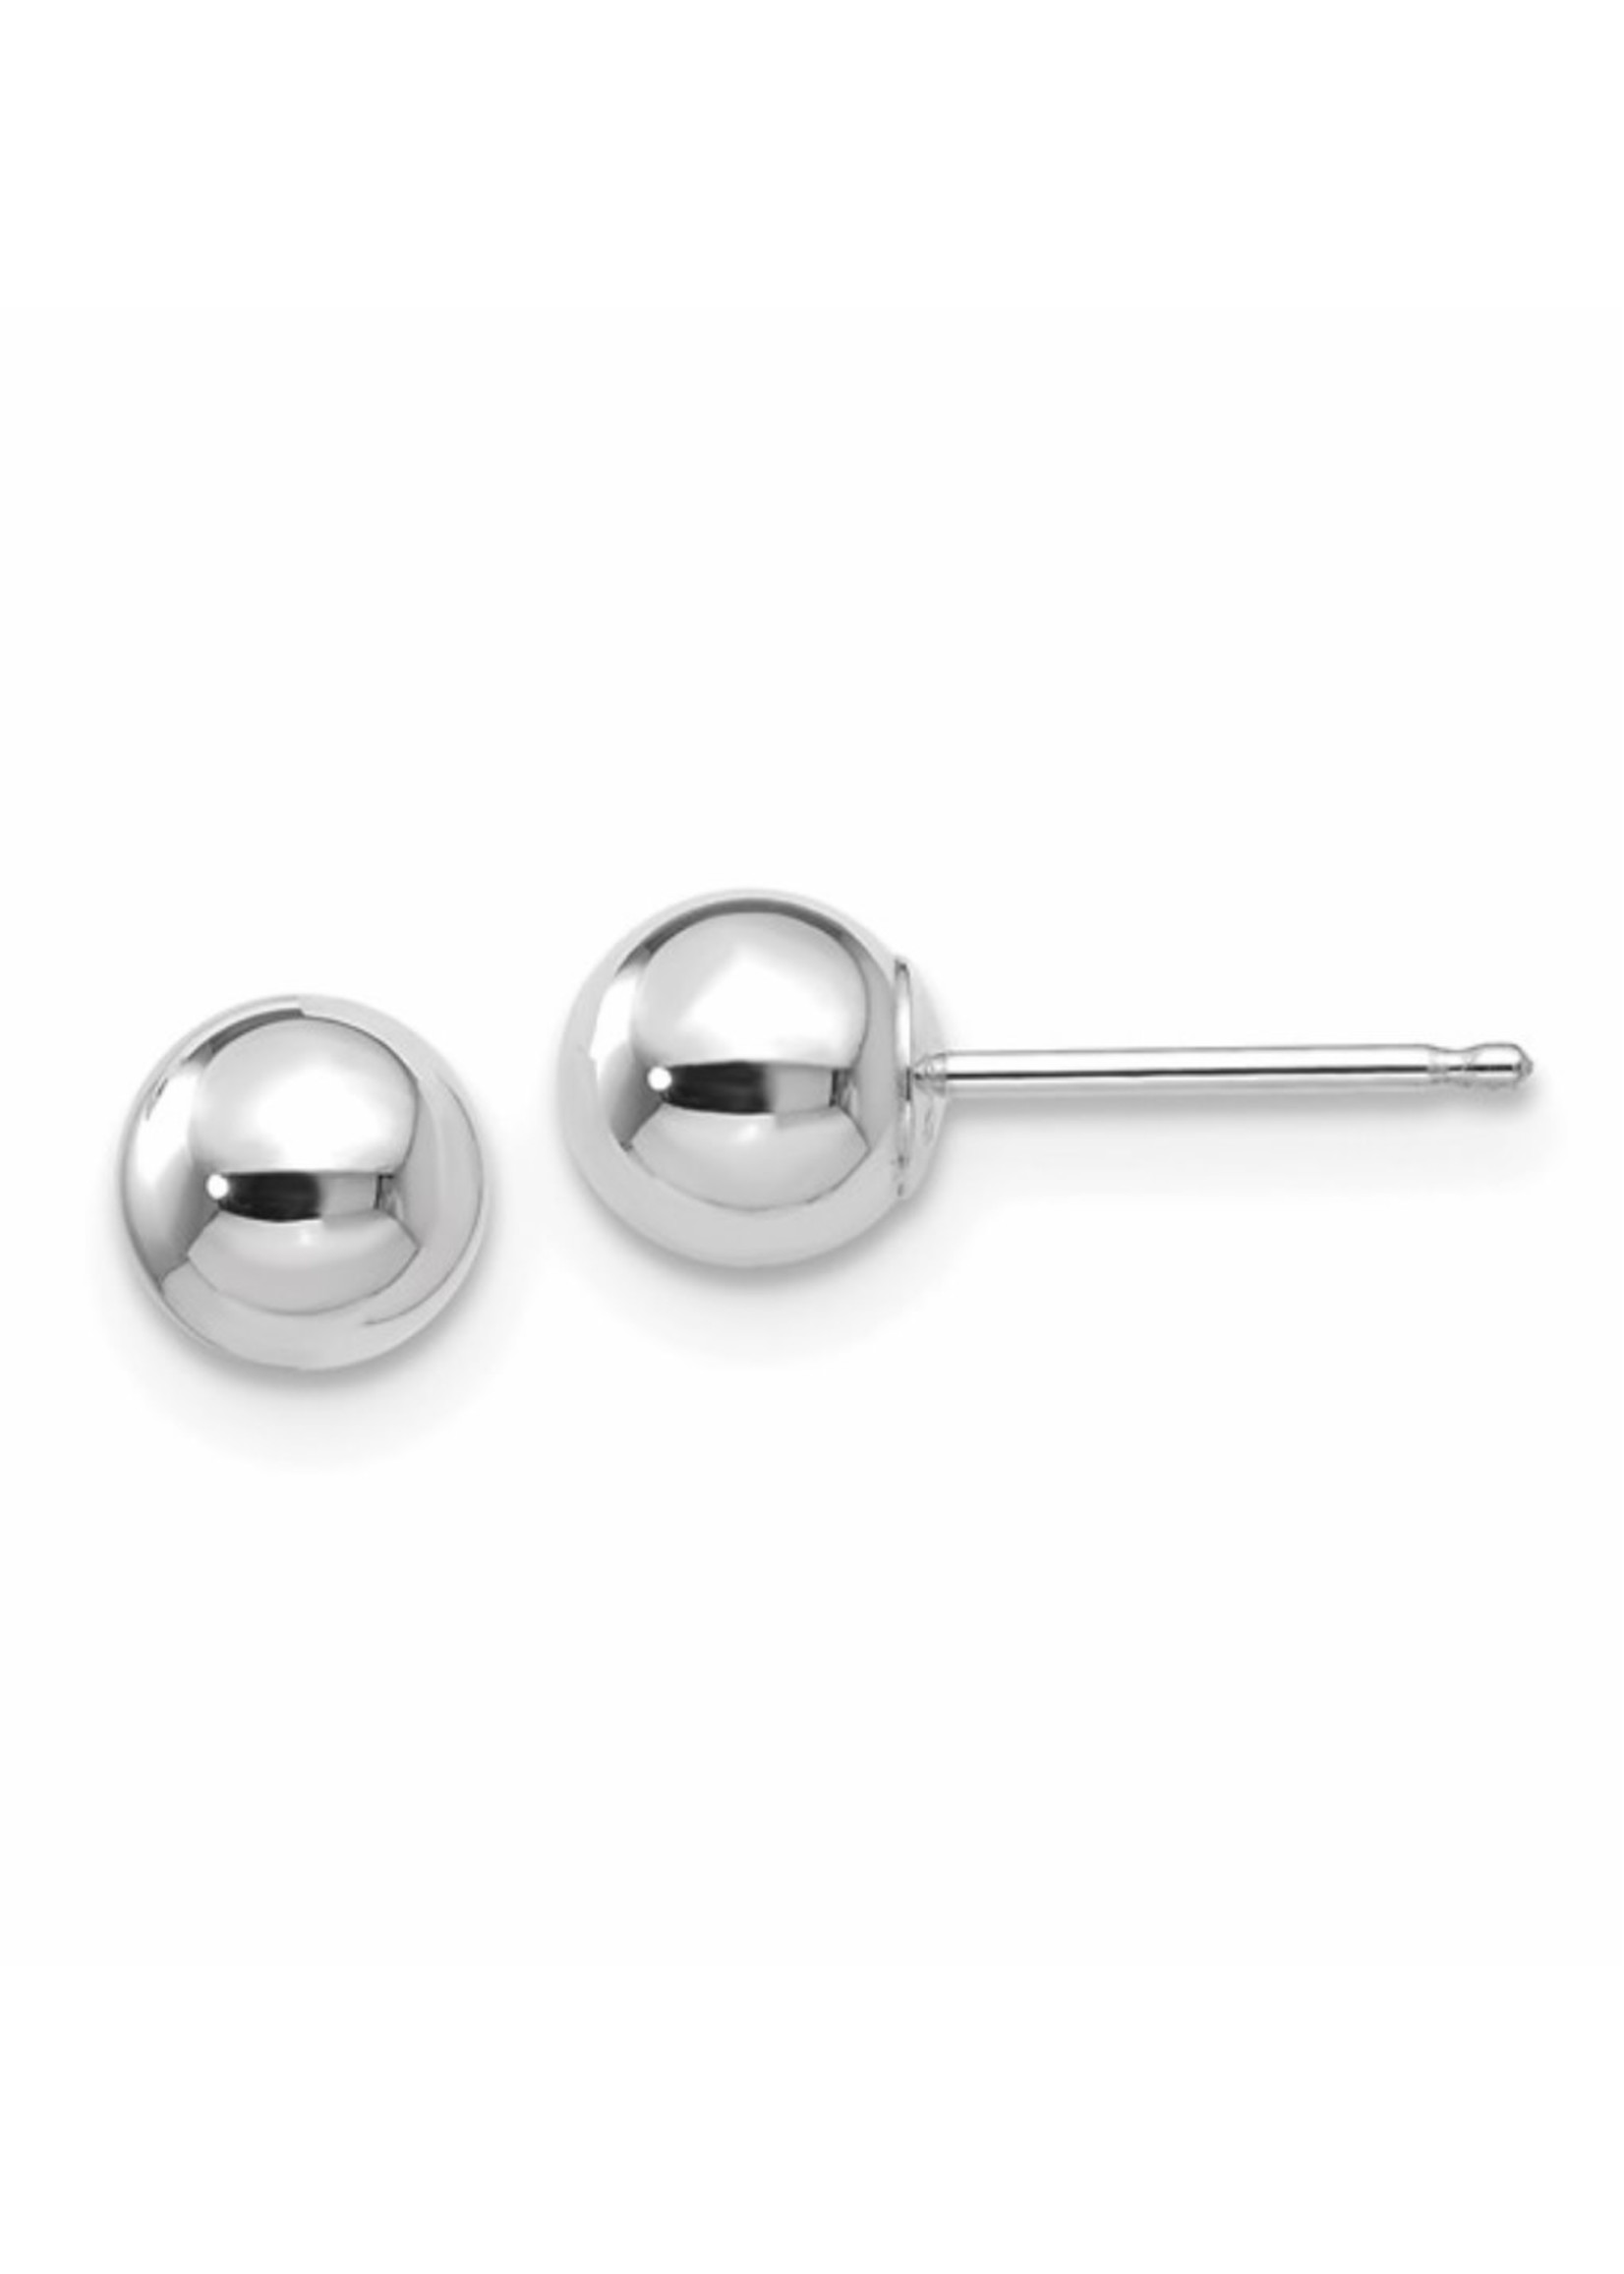 Quality Gold Inc. 14k White Gold Polished 5mm Ball Post Earrings